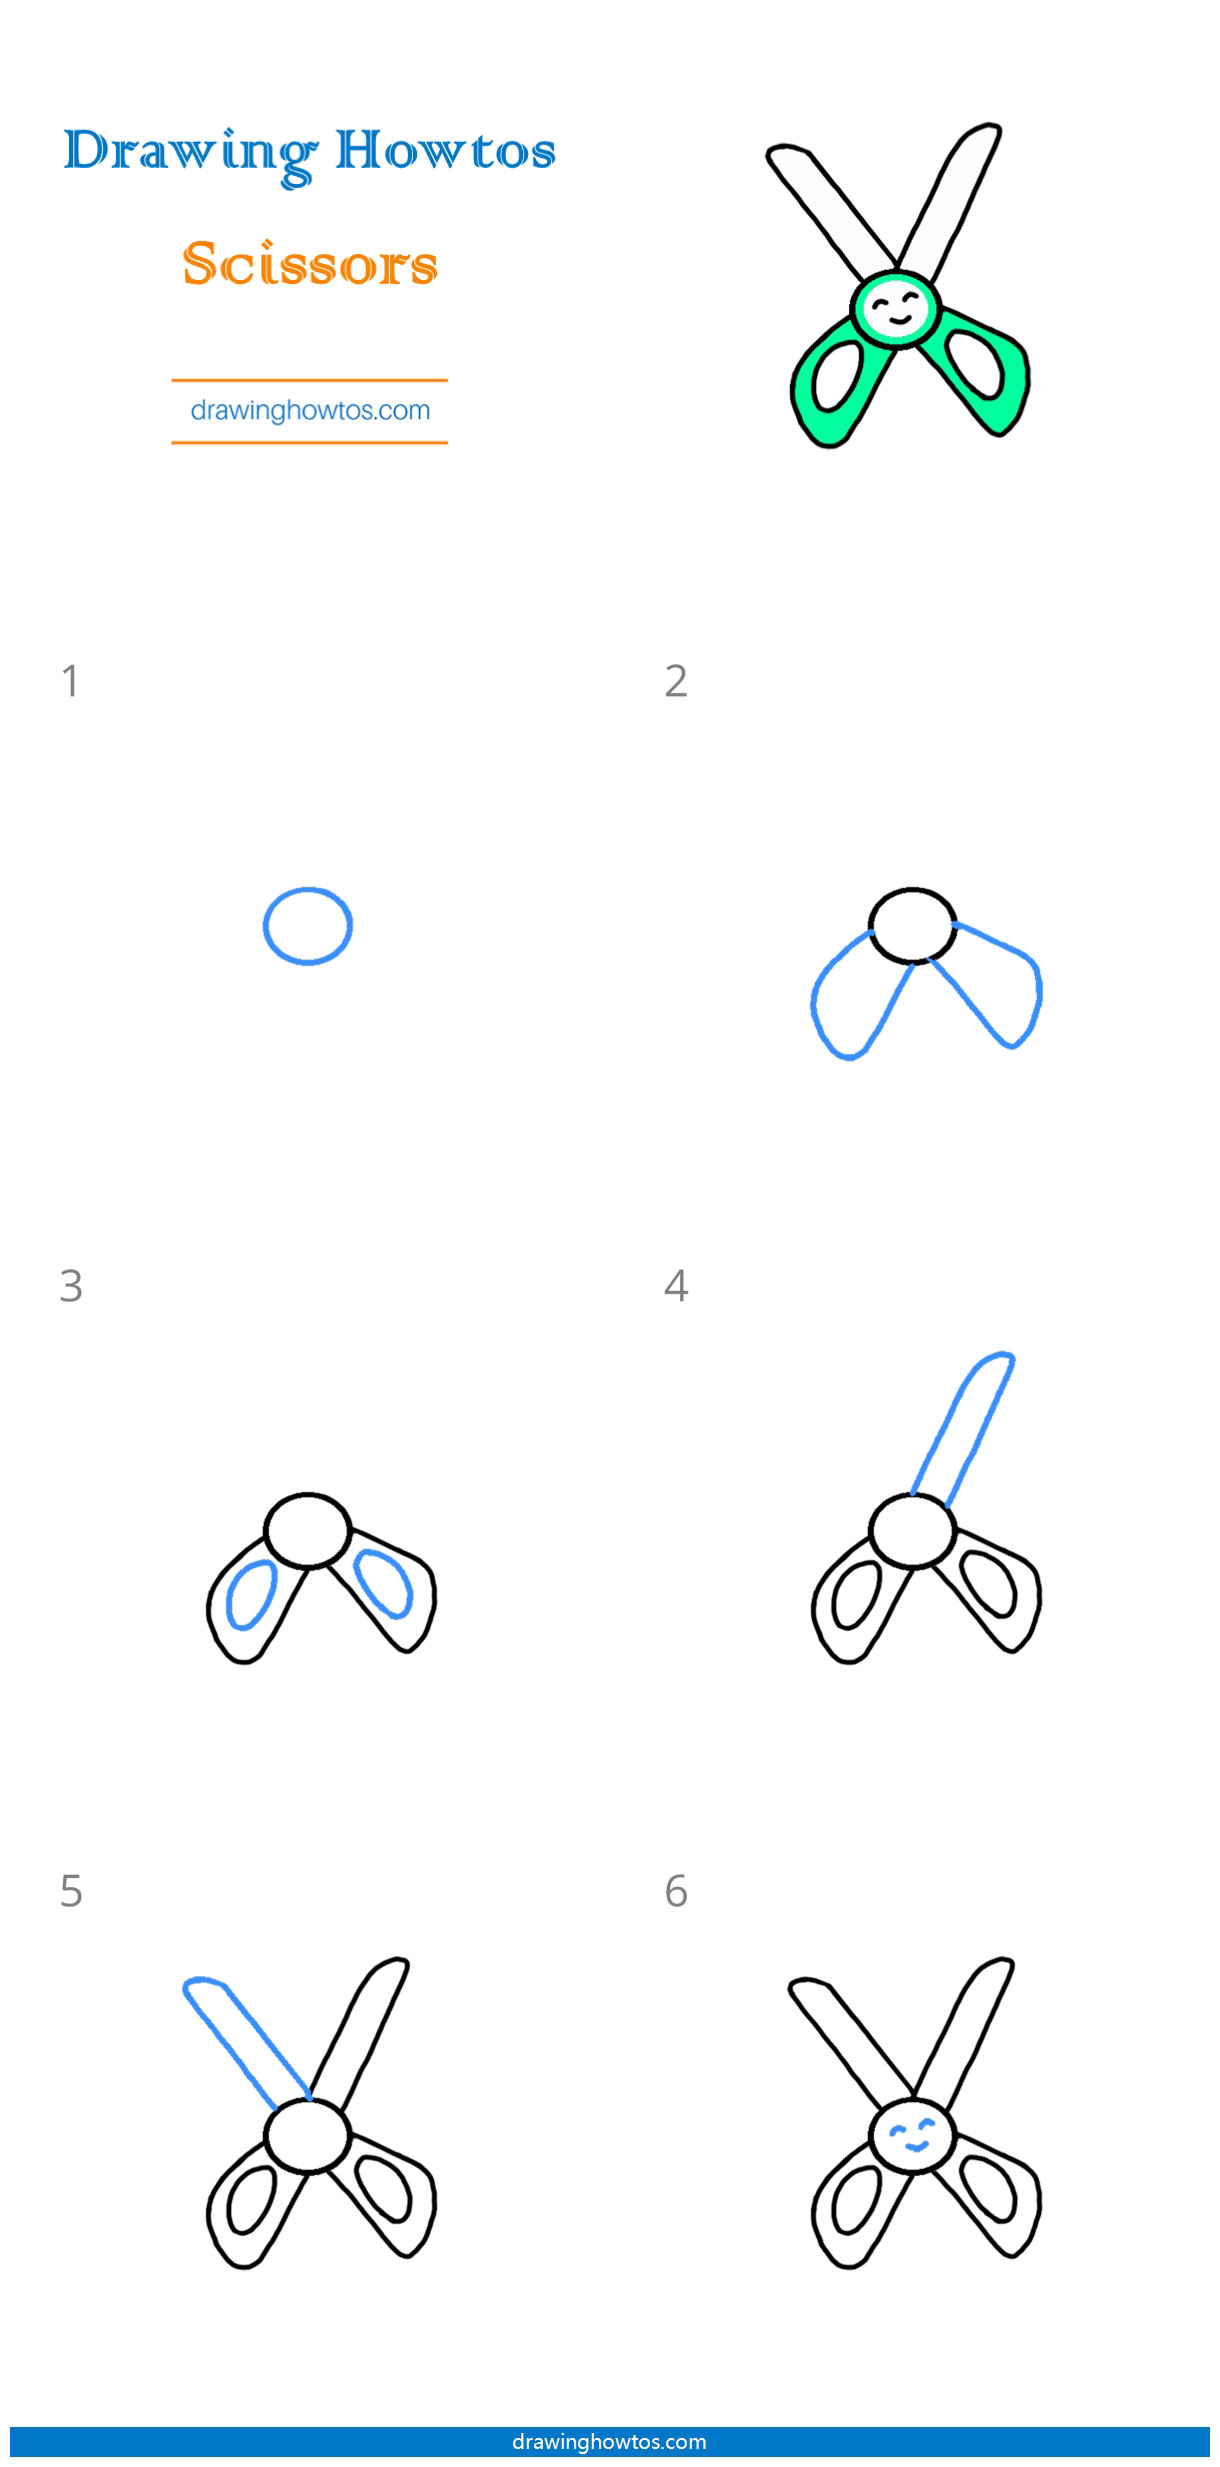 How to Draw Scissors - Step by Step Easy Drawing Guides - Drawing Howtos